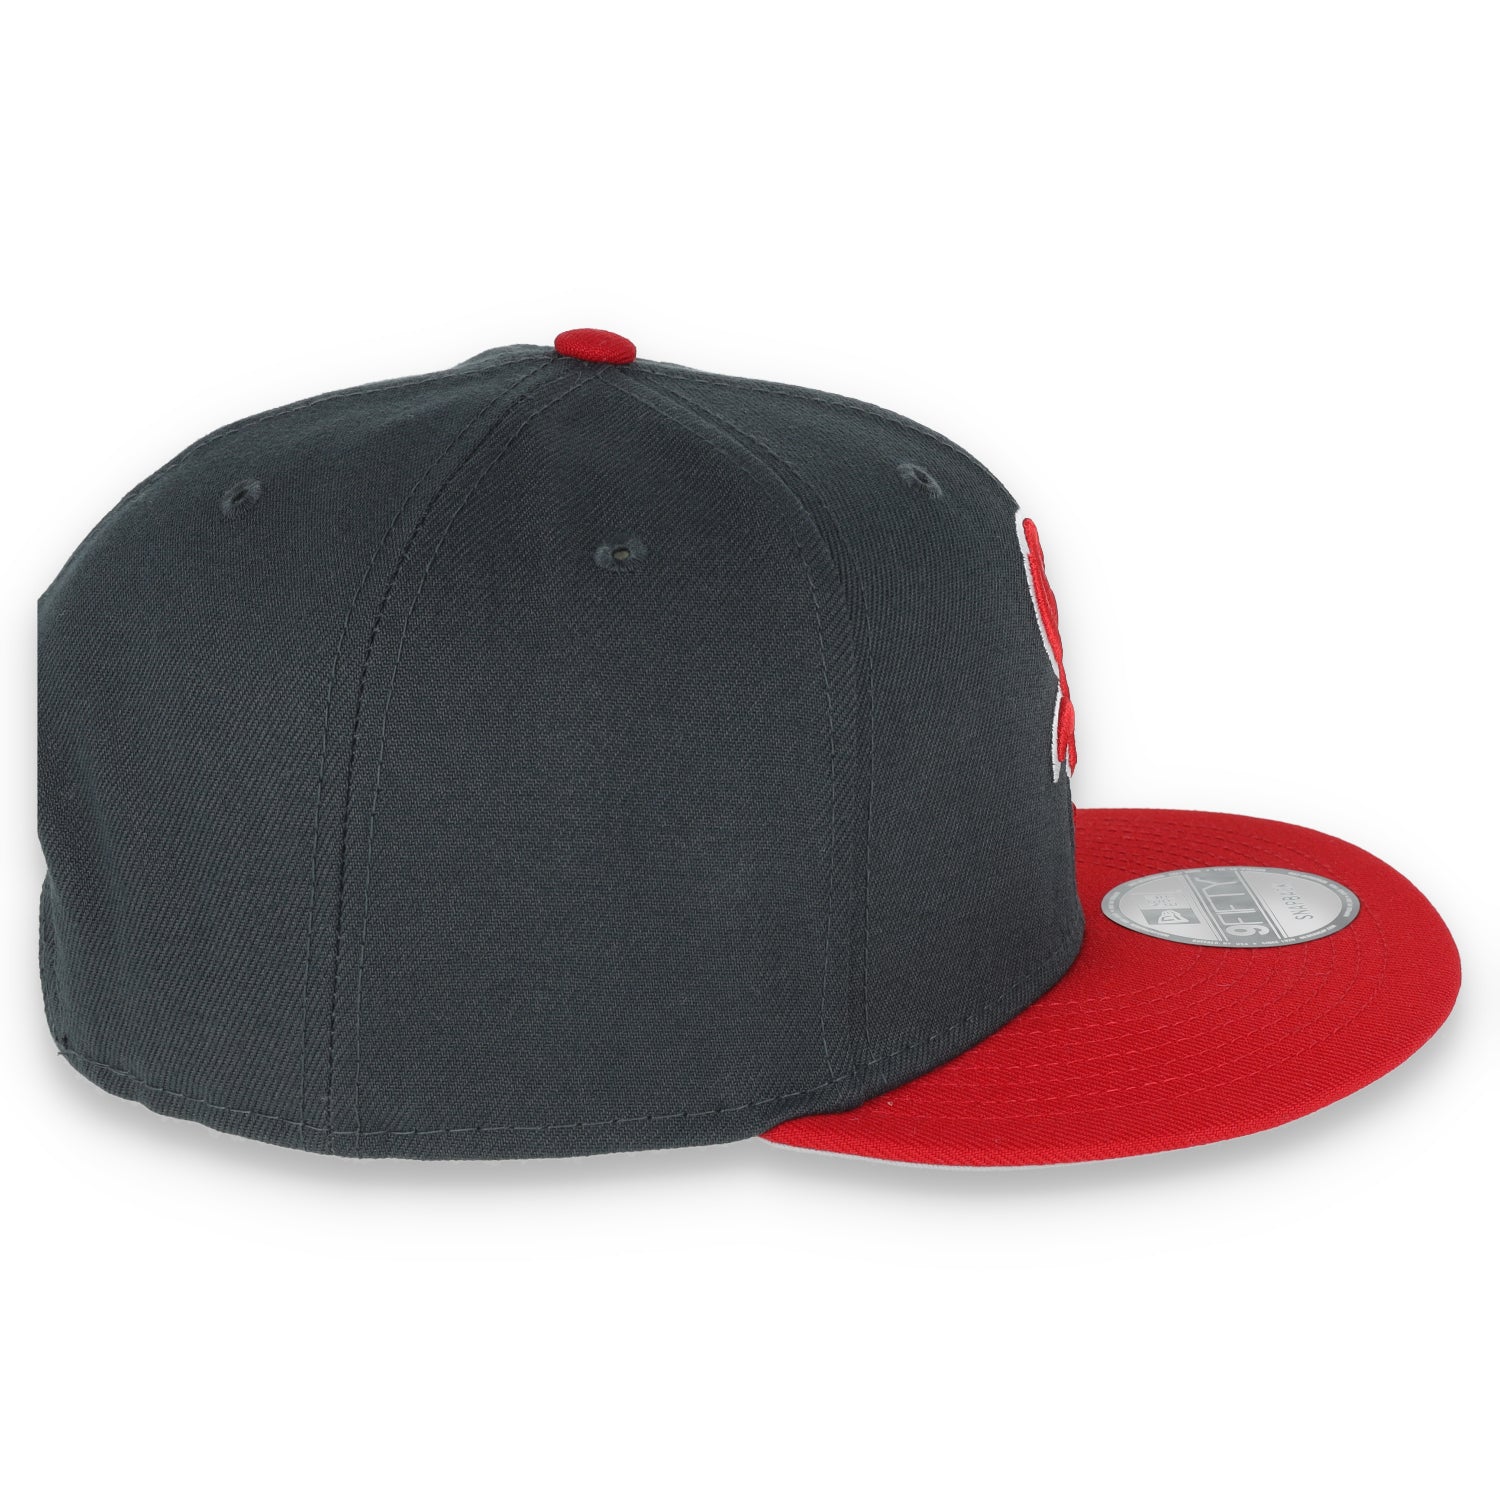 New Era Chicago White Sox 2-Tone Color Pack 9FIFTY Snapback Hat-Grey/Scarlet